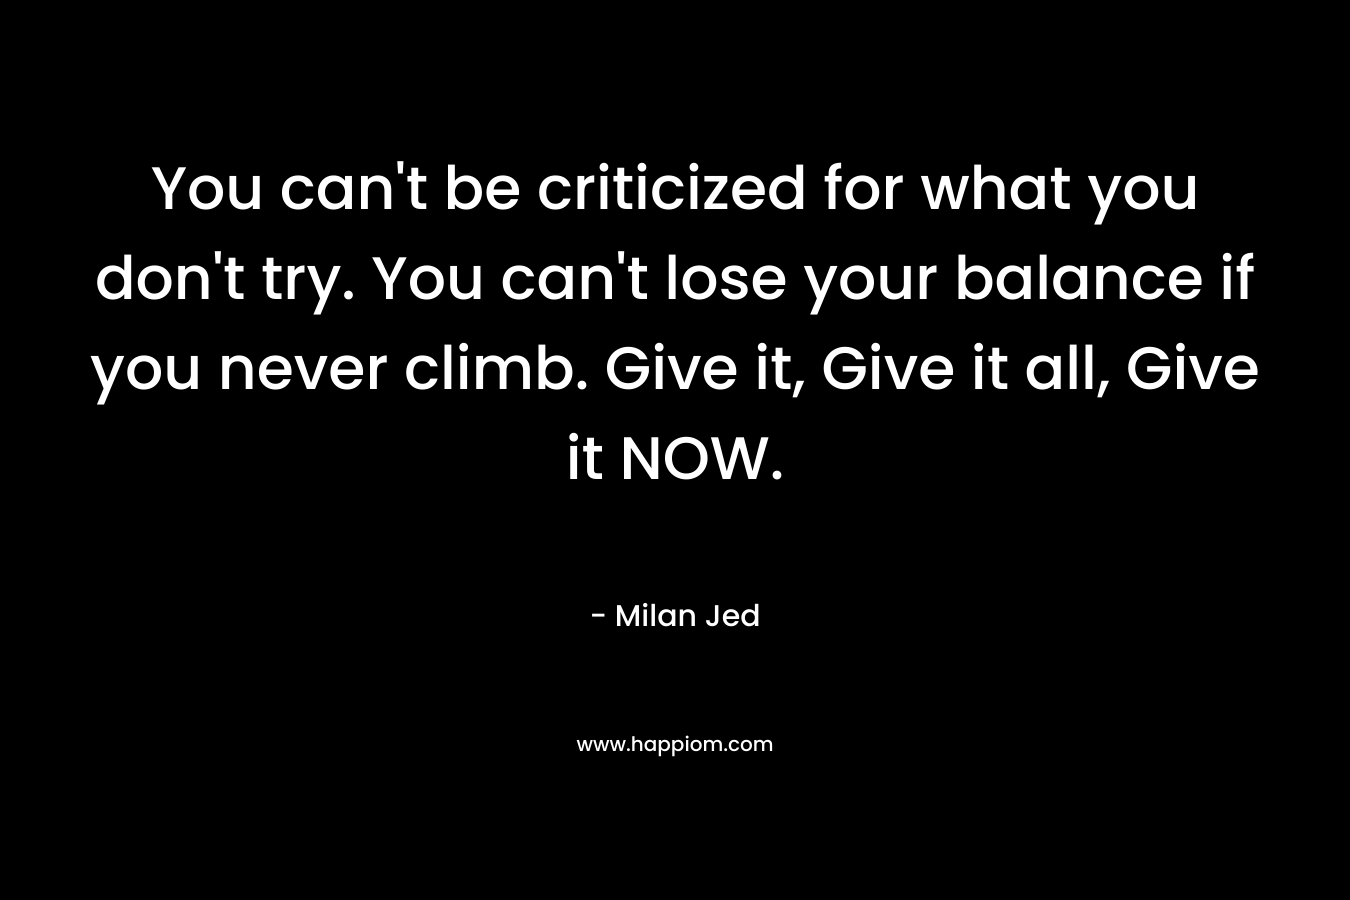 You can’t be criticized for what you don’t try. You can’t lose your balance if you never climb. Give it, Give it all, Give it NOW. – Milan Jed